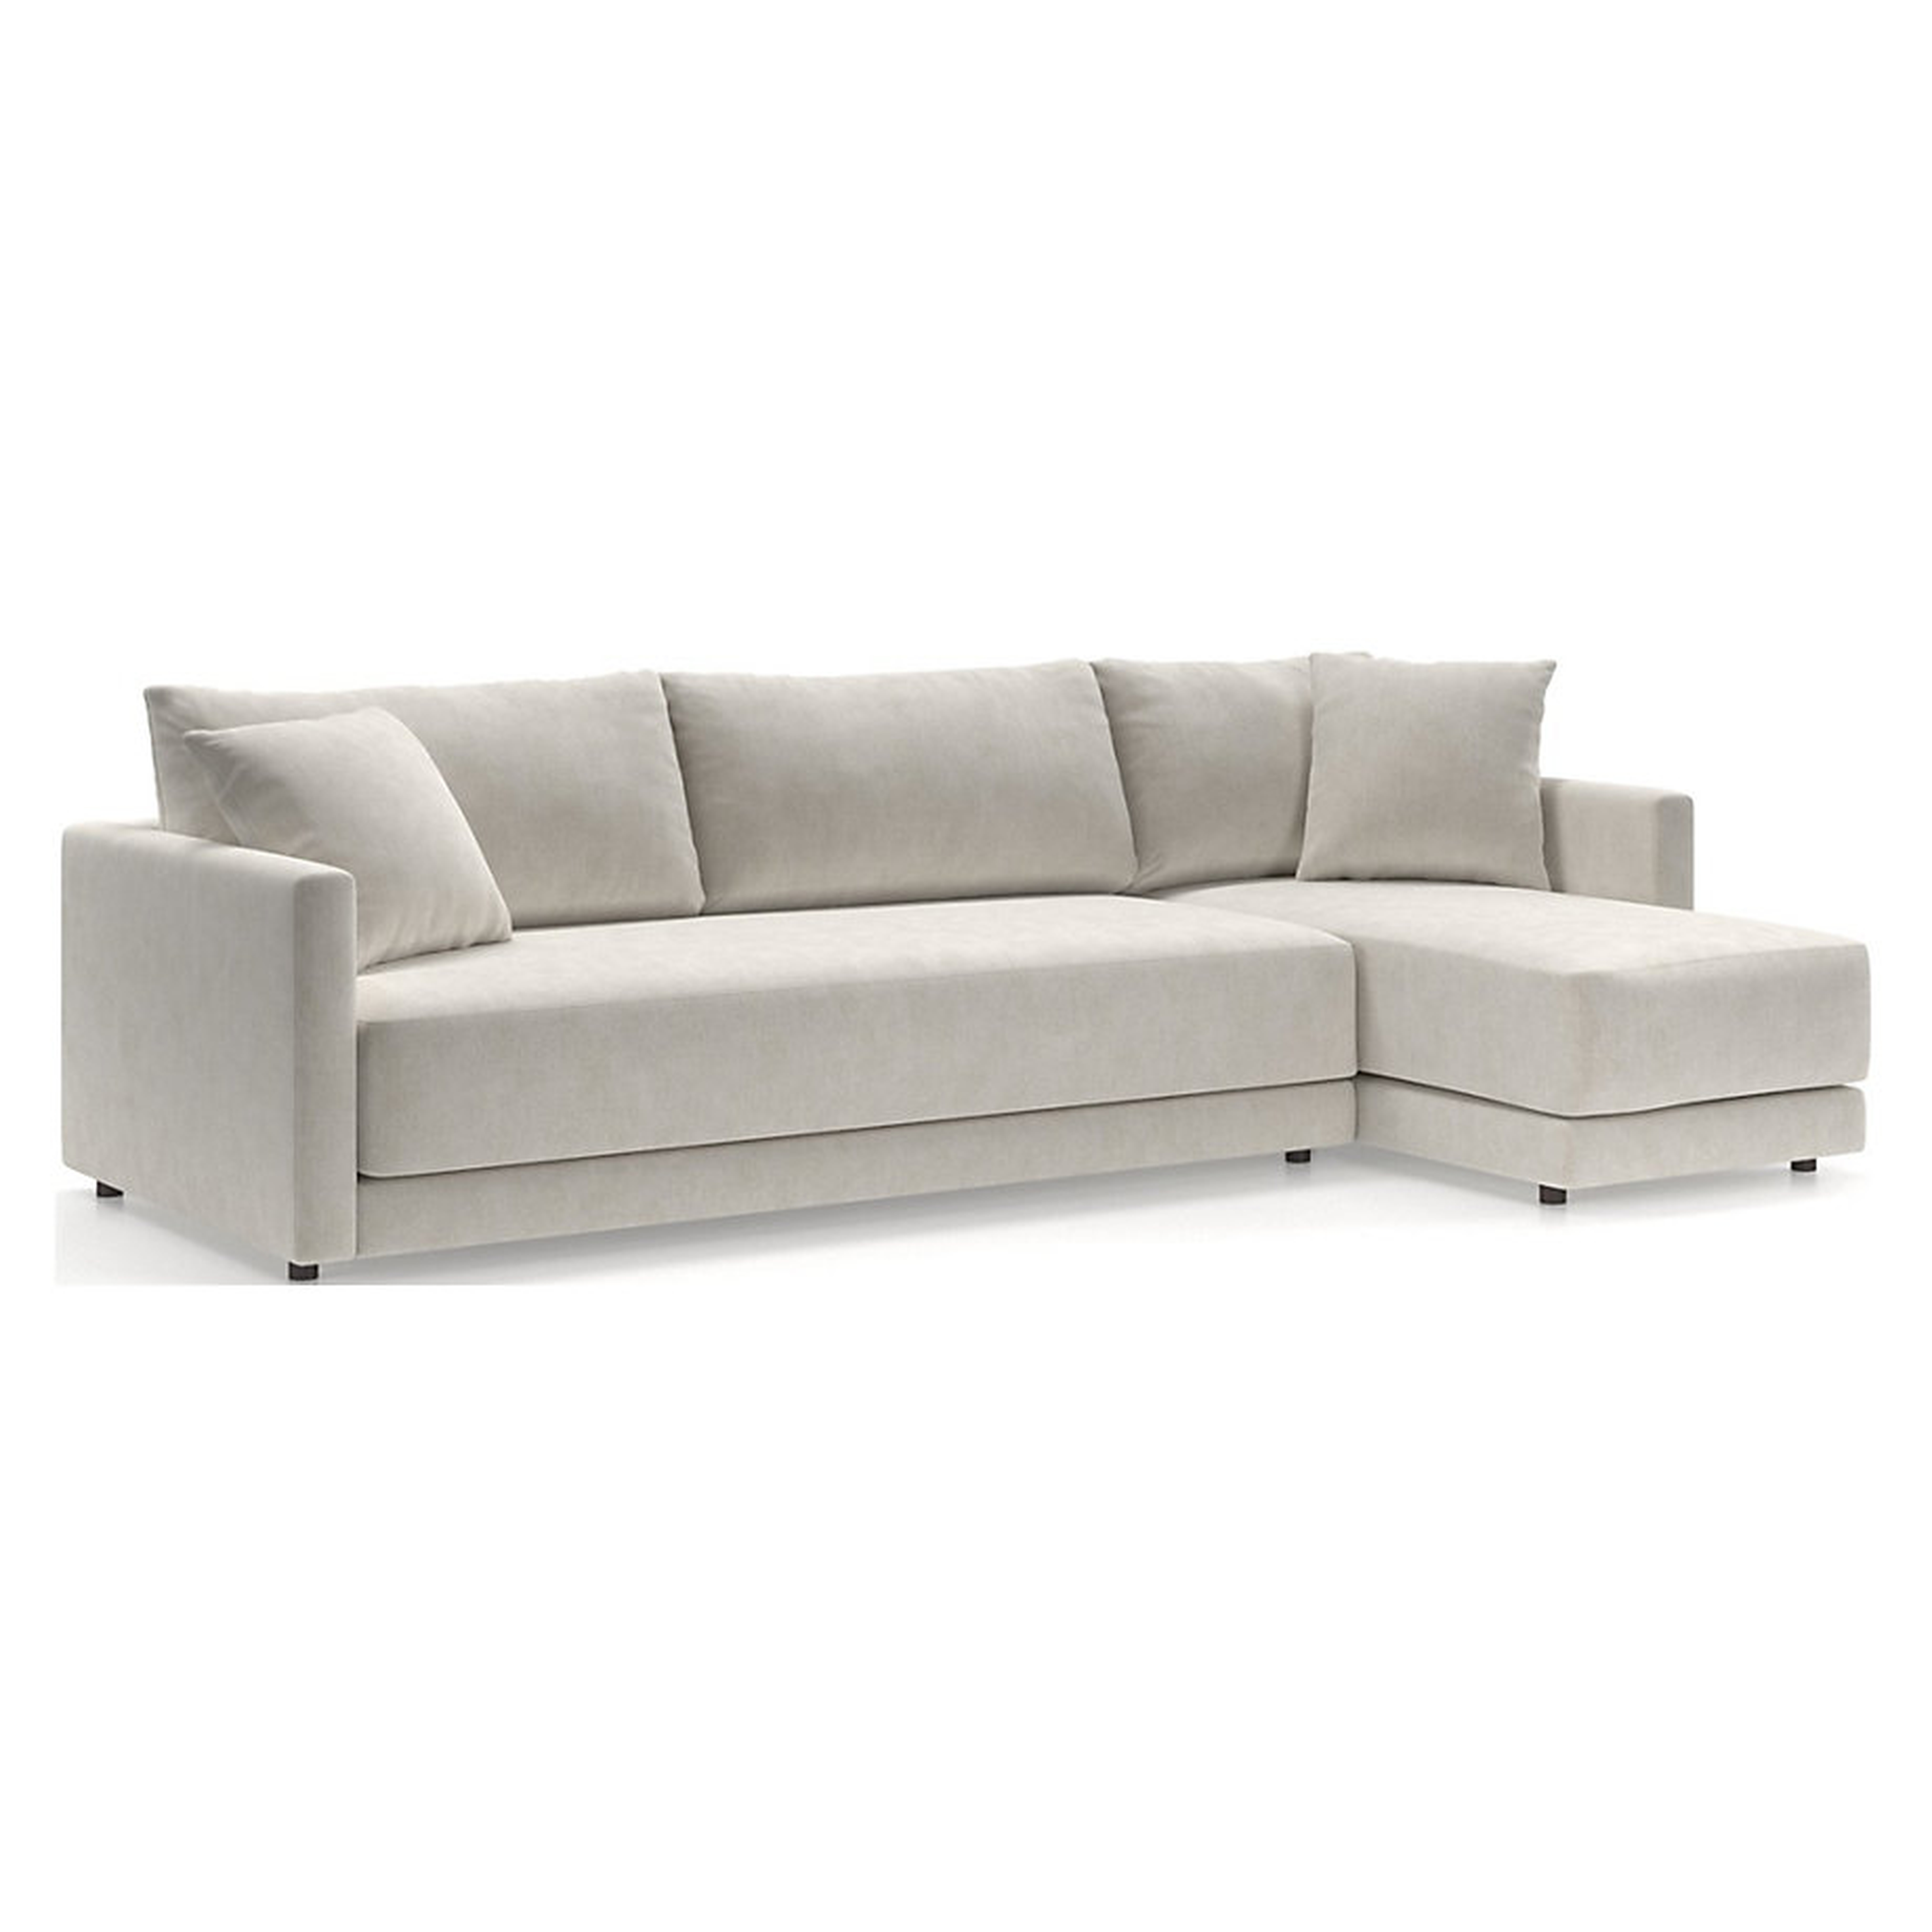 Gather 2-Piece Chaise Bench Sectional Sofa - Crate and Barrel